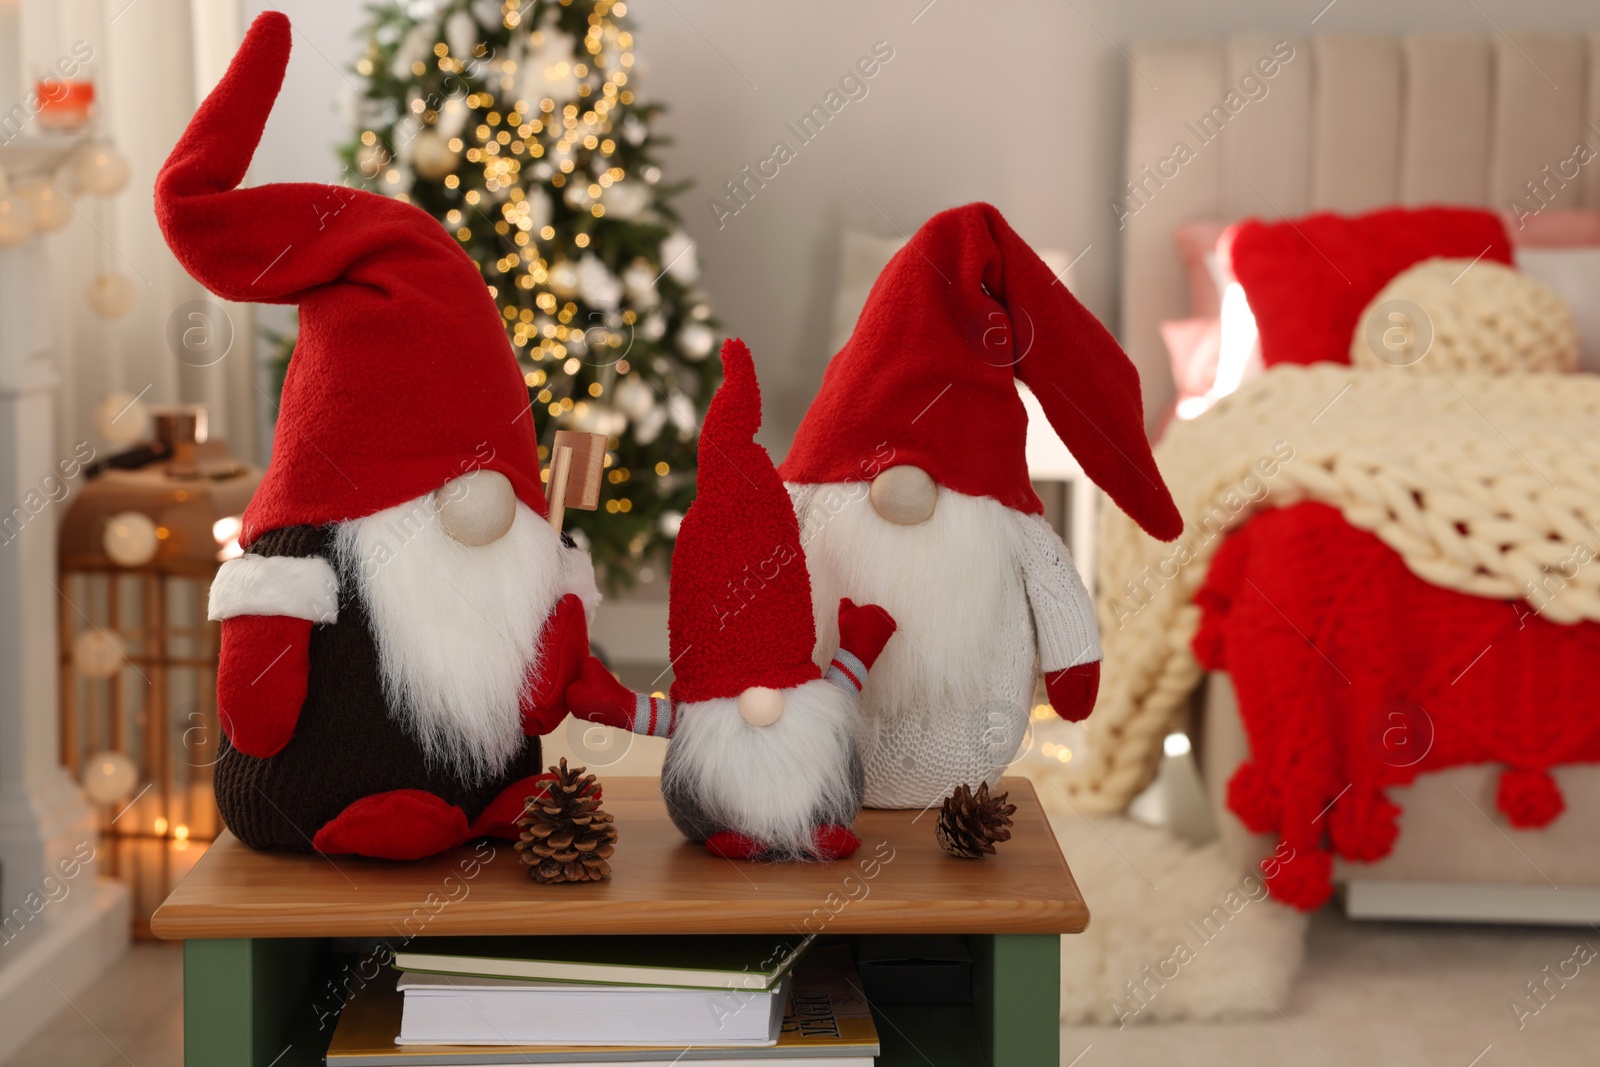 Photo of Cute Christmas gnomes on wooden table in room with festive decorations